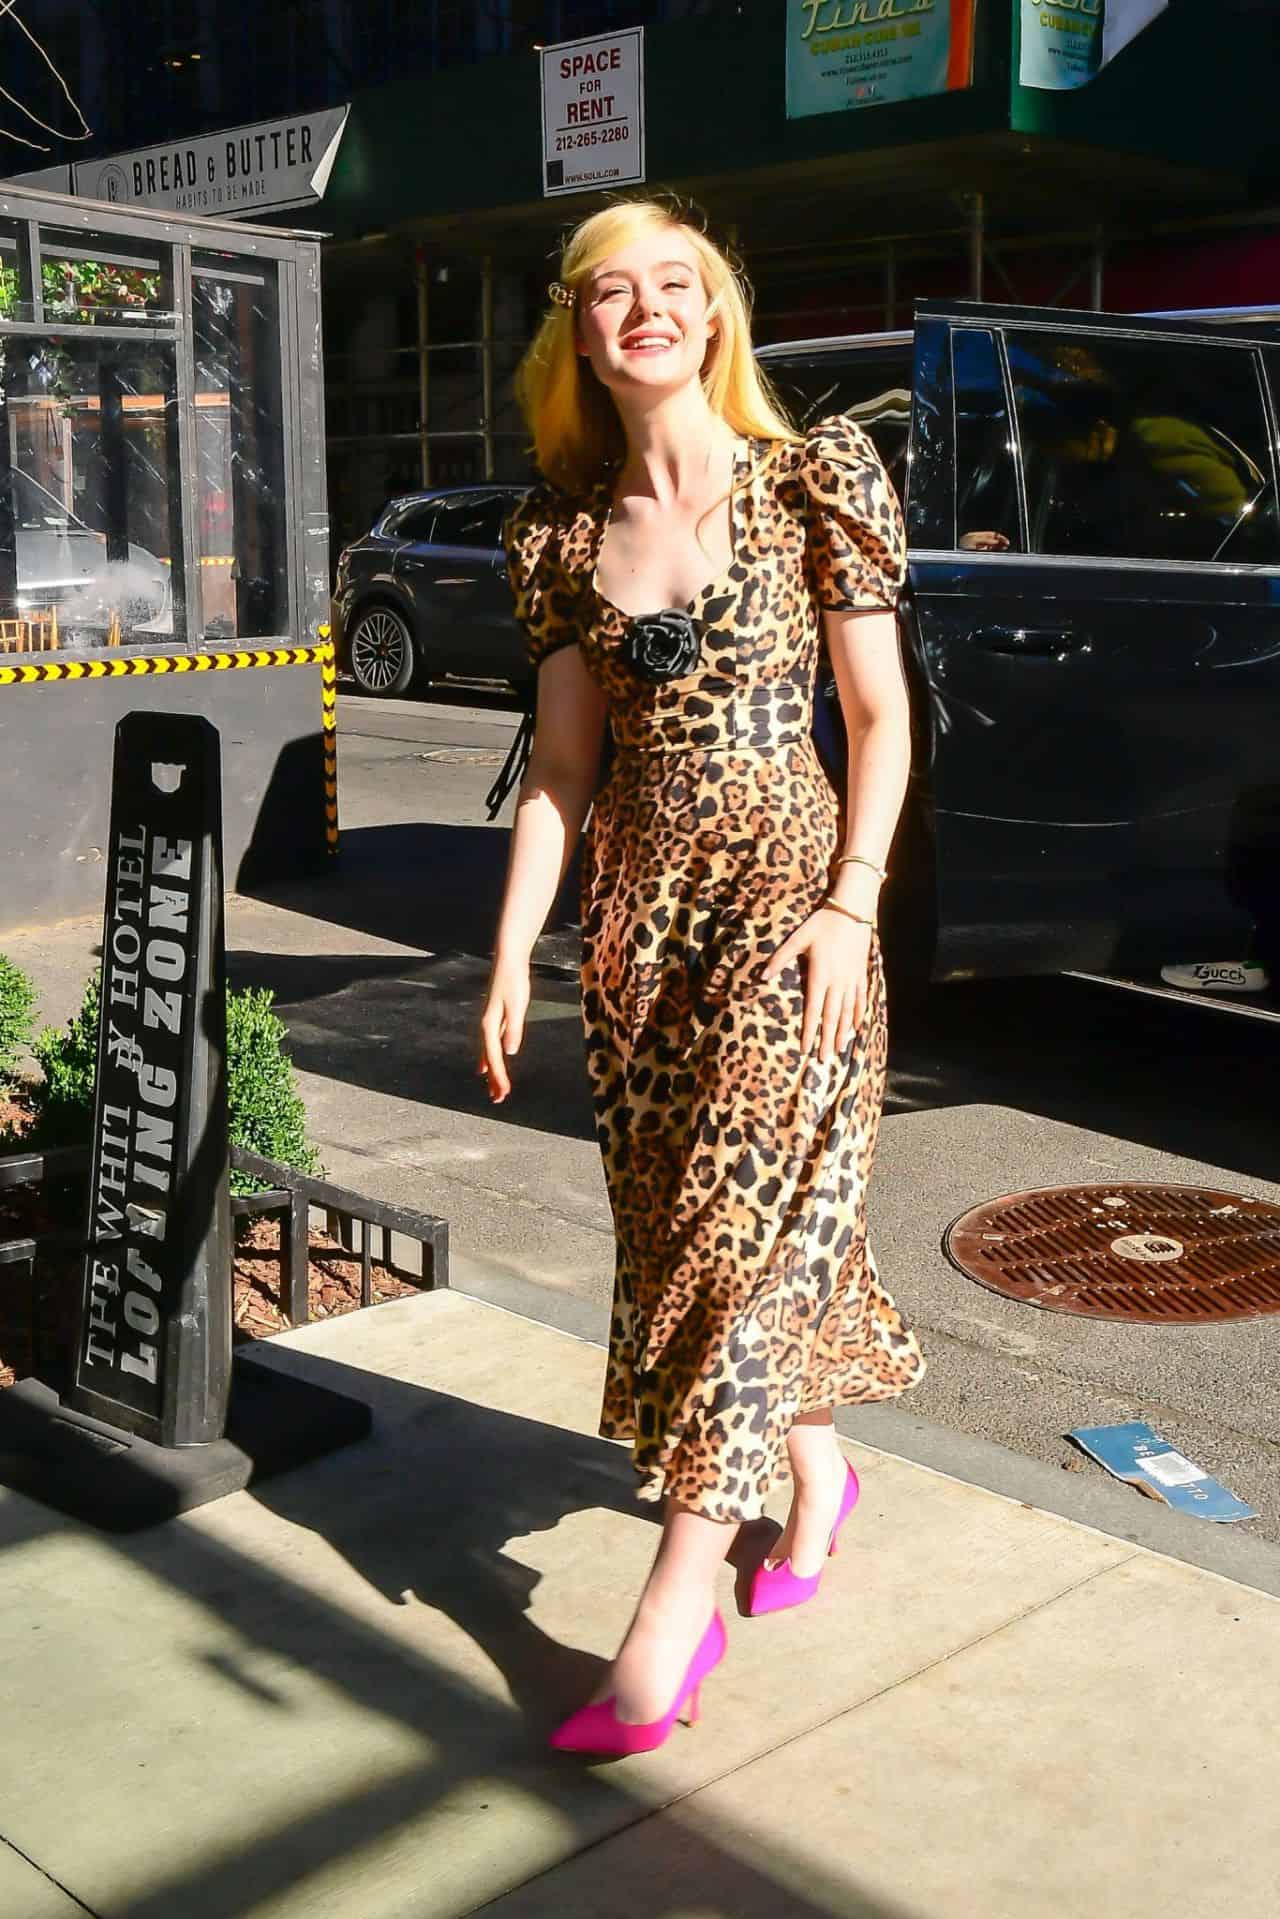 Elle Fanning Stuns All in a Chic Leopard-print Dress and Pink Pumps in NYC